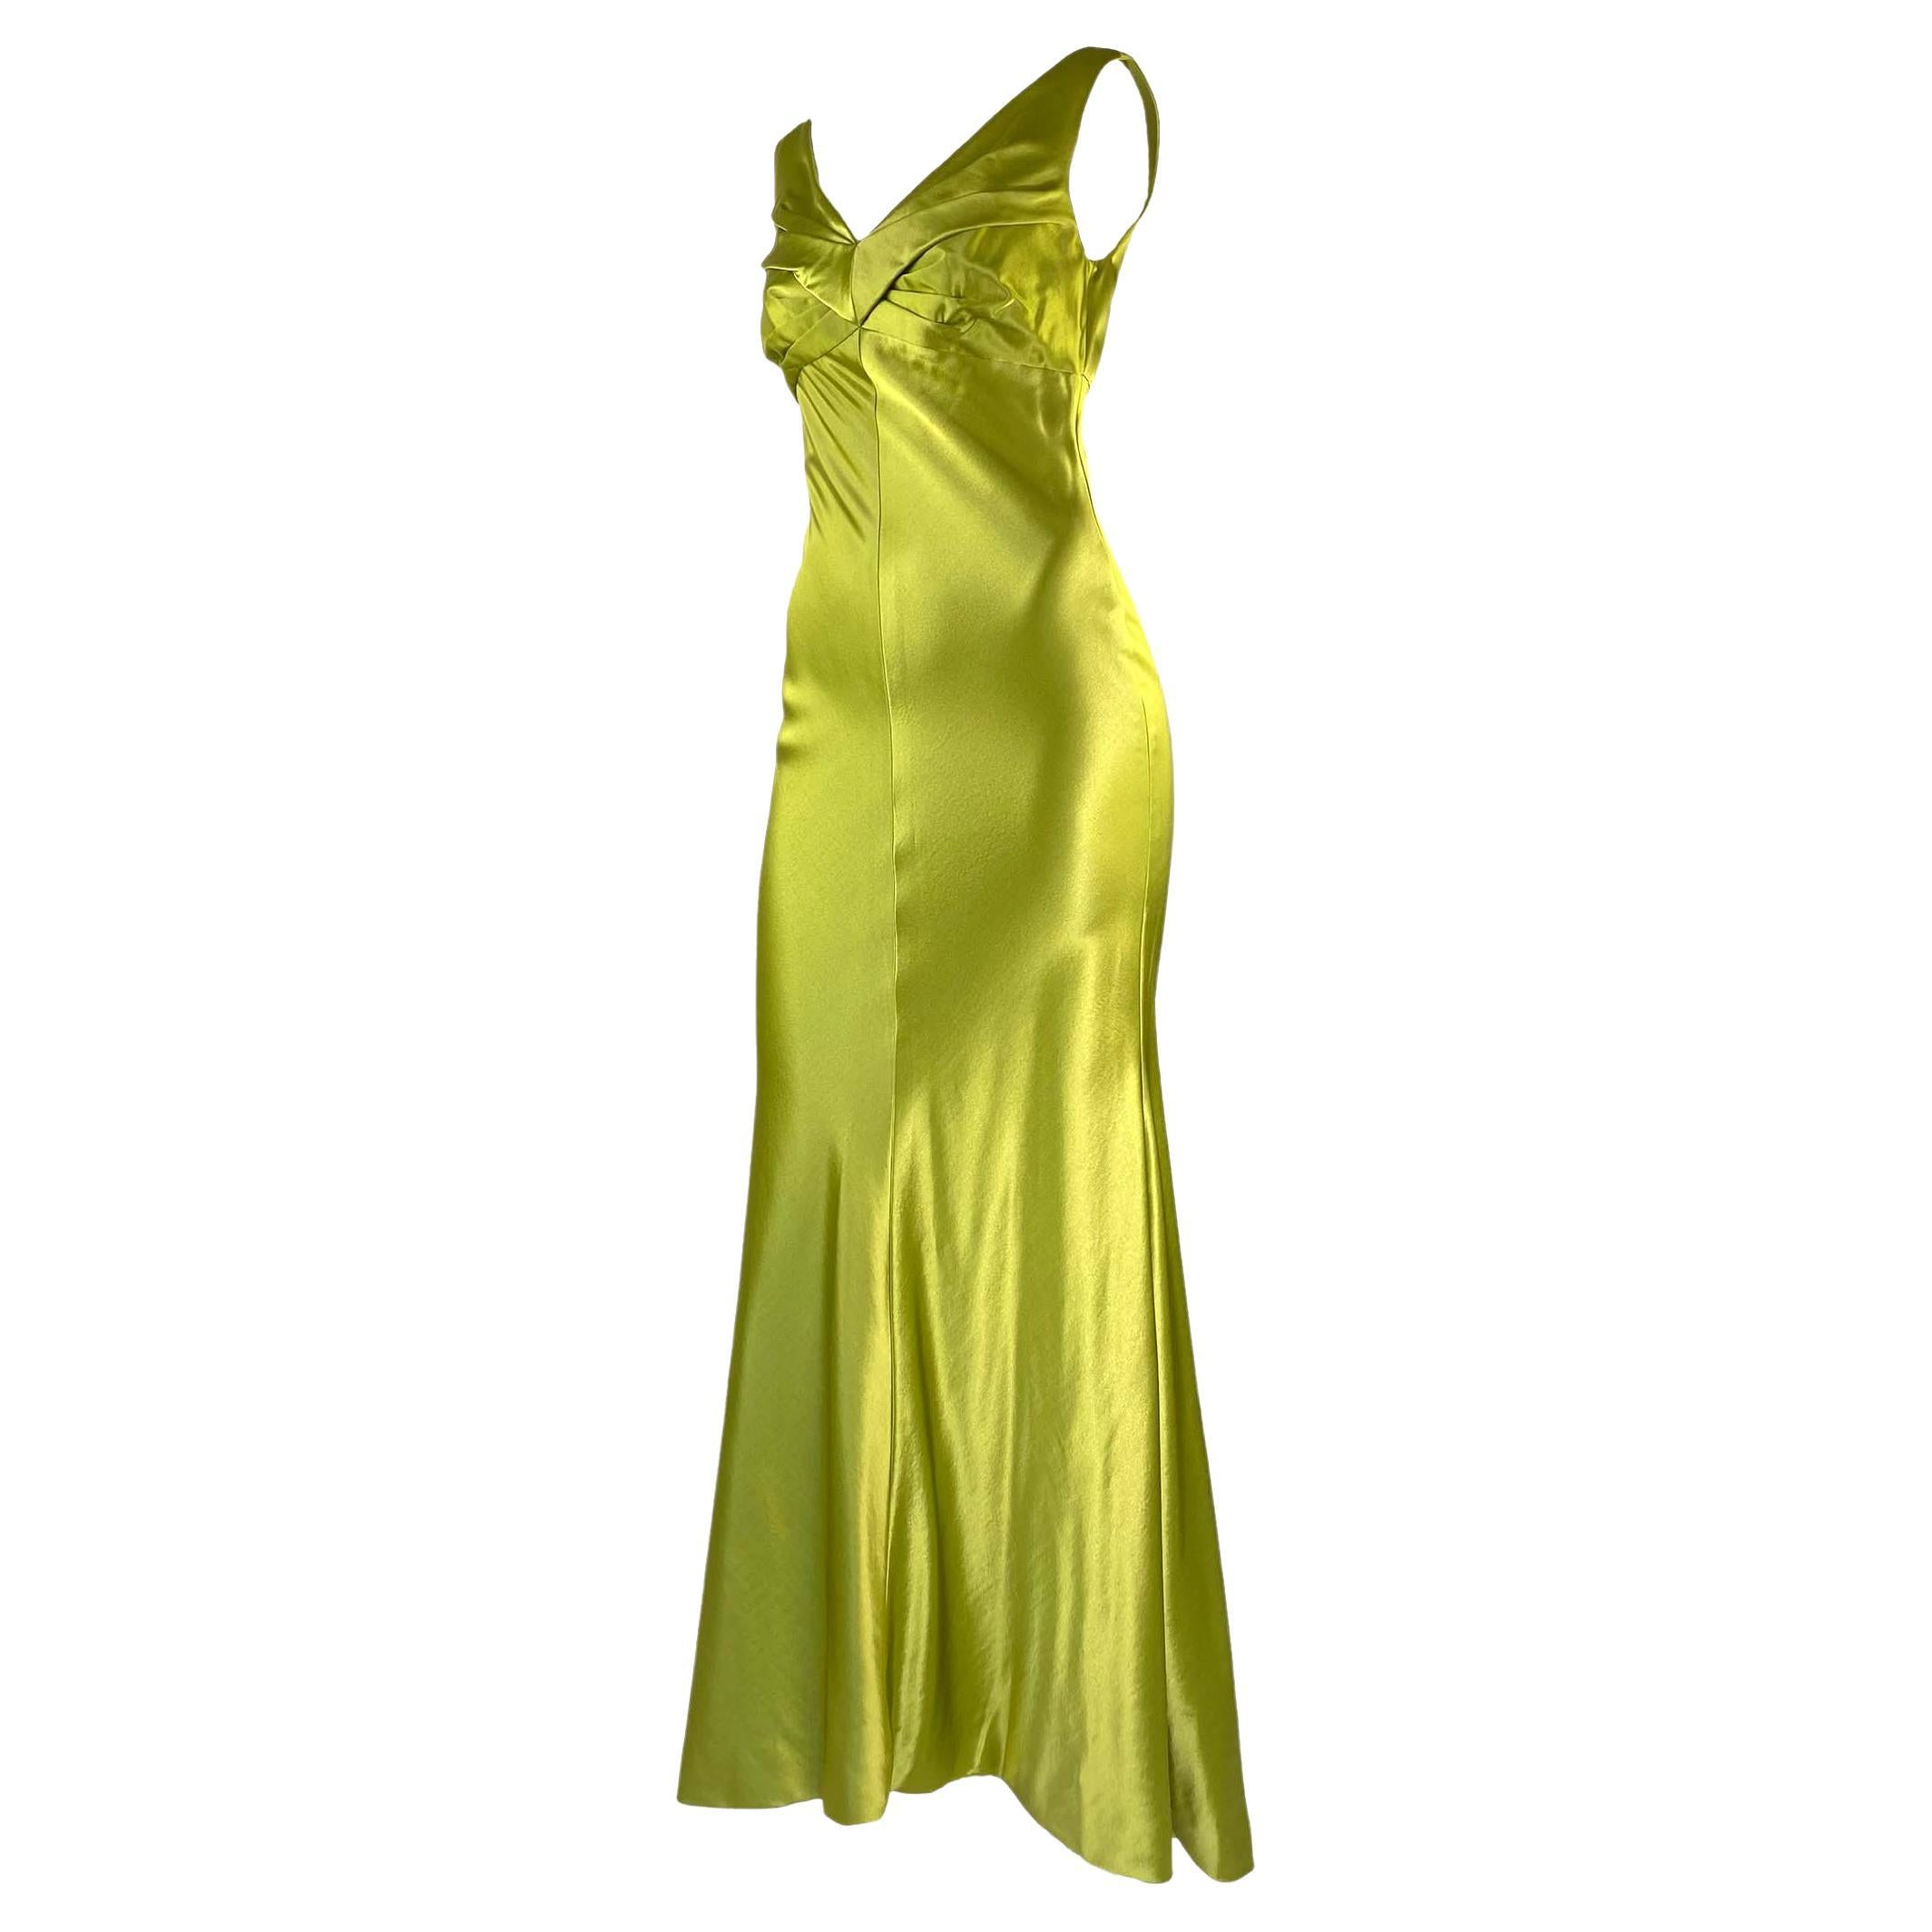 F/W 1995 Gianni Versace Chartreuse Green Silk Gown Dress Runway Documented